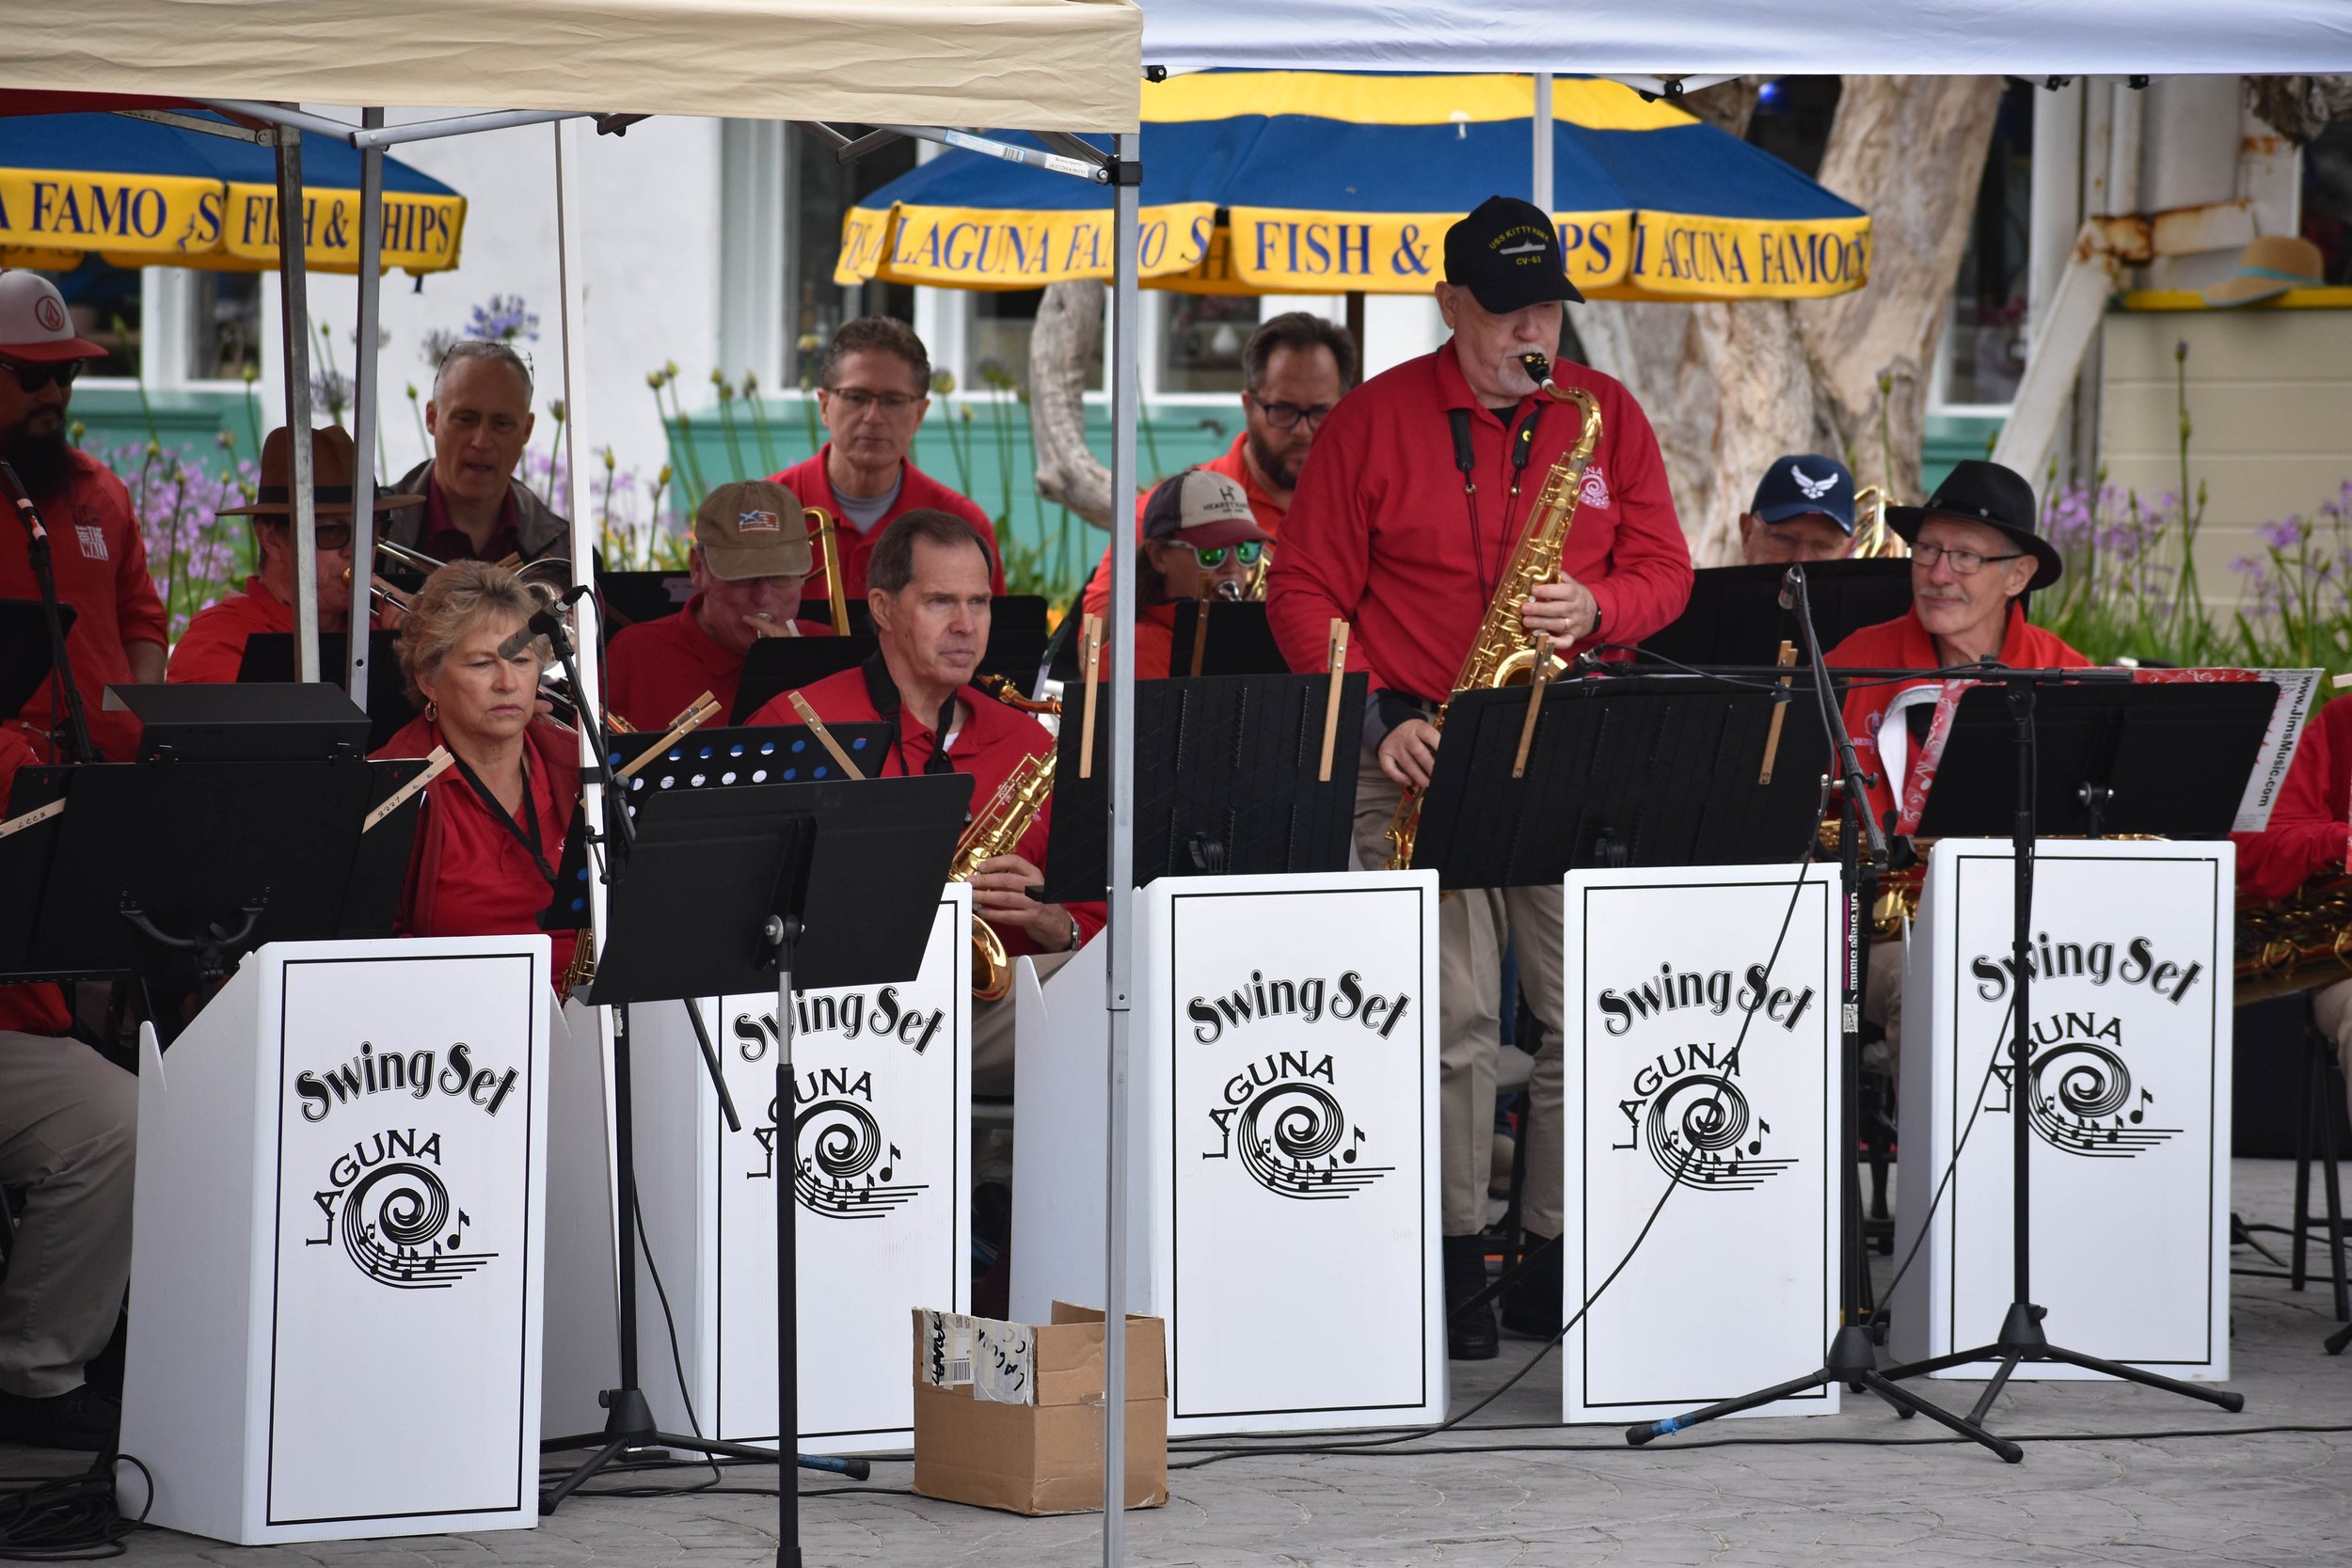 05-29-2023 LCCB and Jazz Band Memorial Day Concerts by Peyton Webster106-32.jpg